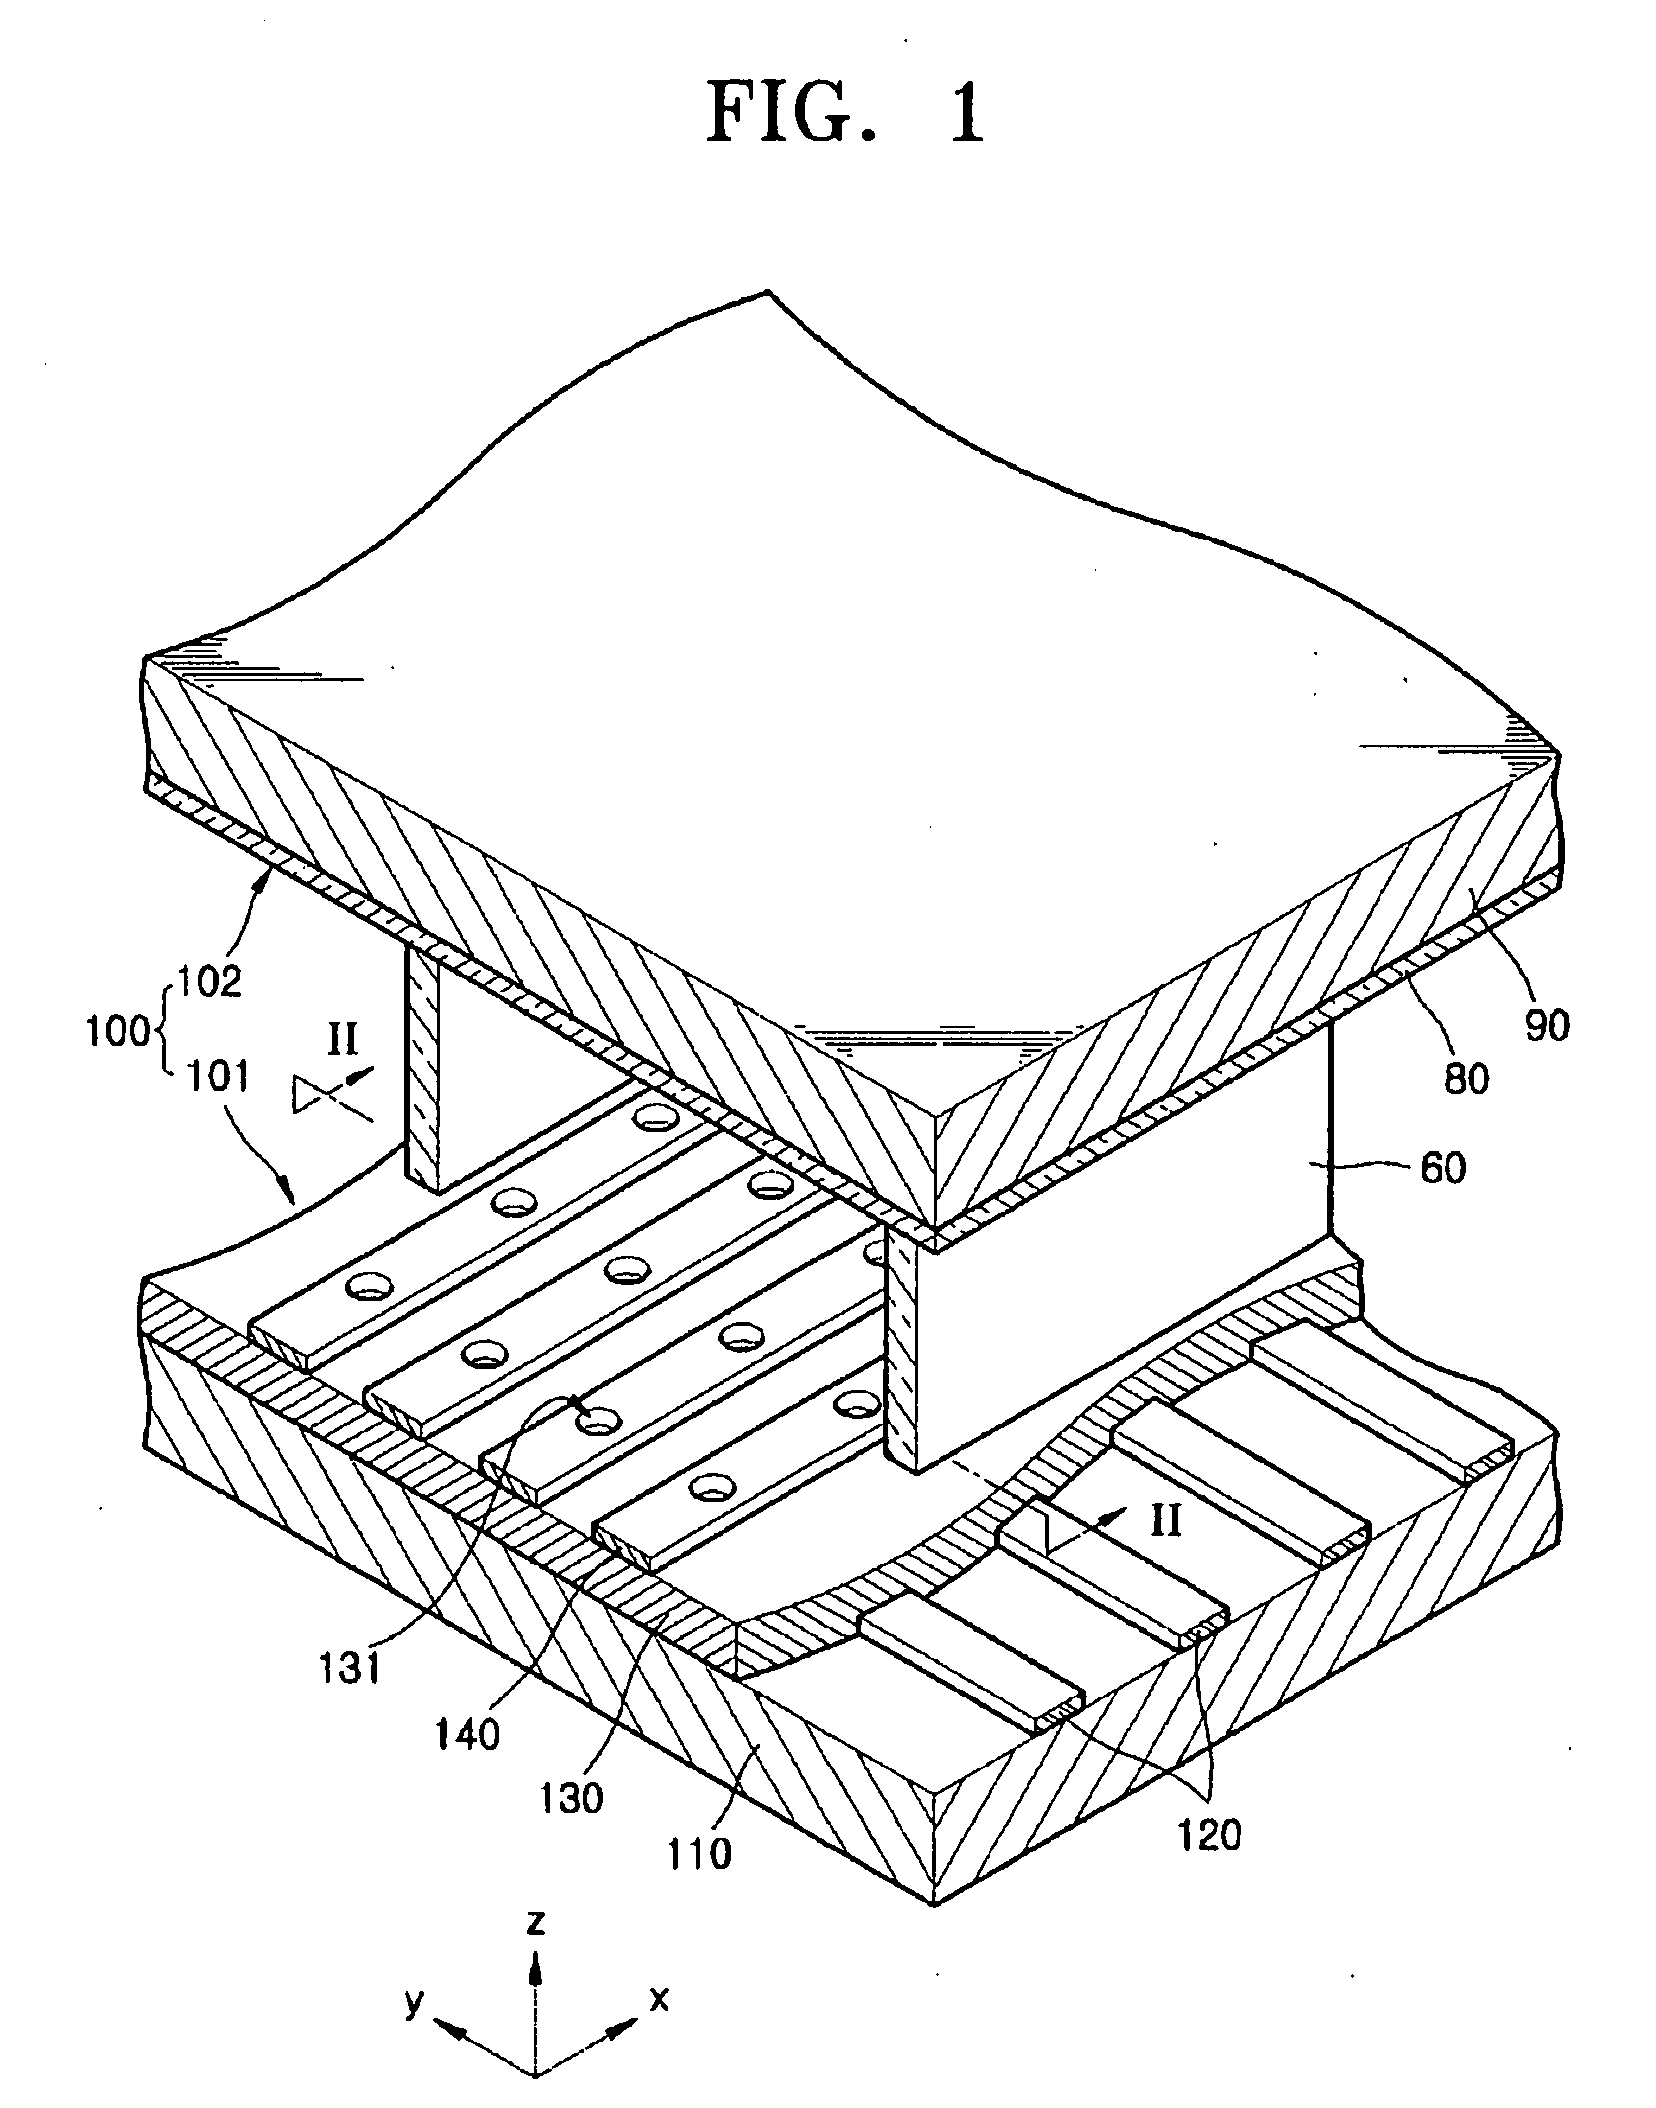 Carbon-based material for electron emission source, electron emission source containing the carbon-based material, electron emission device including the electron emission source, and method of preparing electron emission source